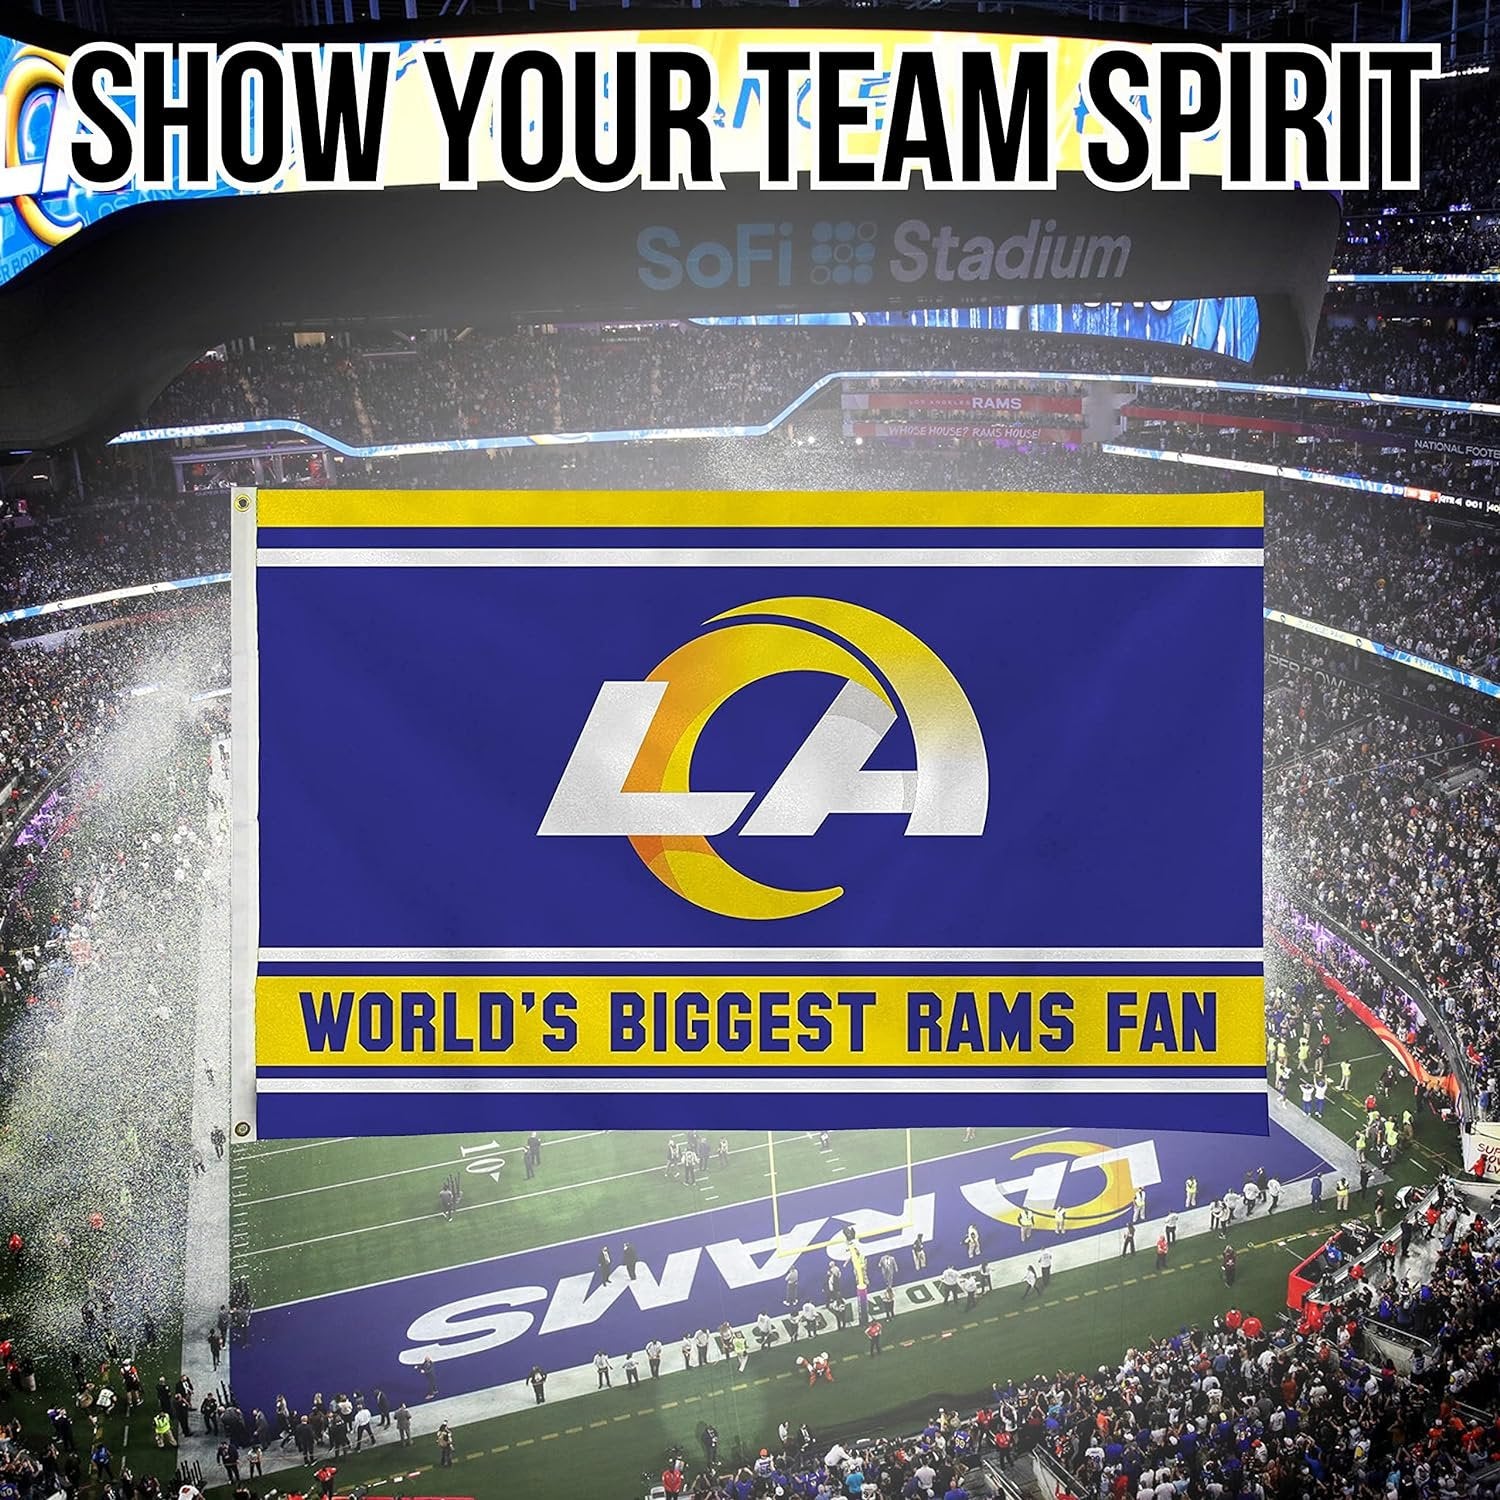 Los Angeles Rams 3x5 Feet Flag Banner, World's Biggest Fan, Metal Grommets, Single Sided, Indoor or Outdoor Use